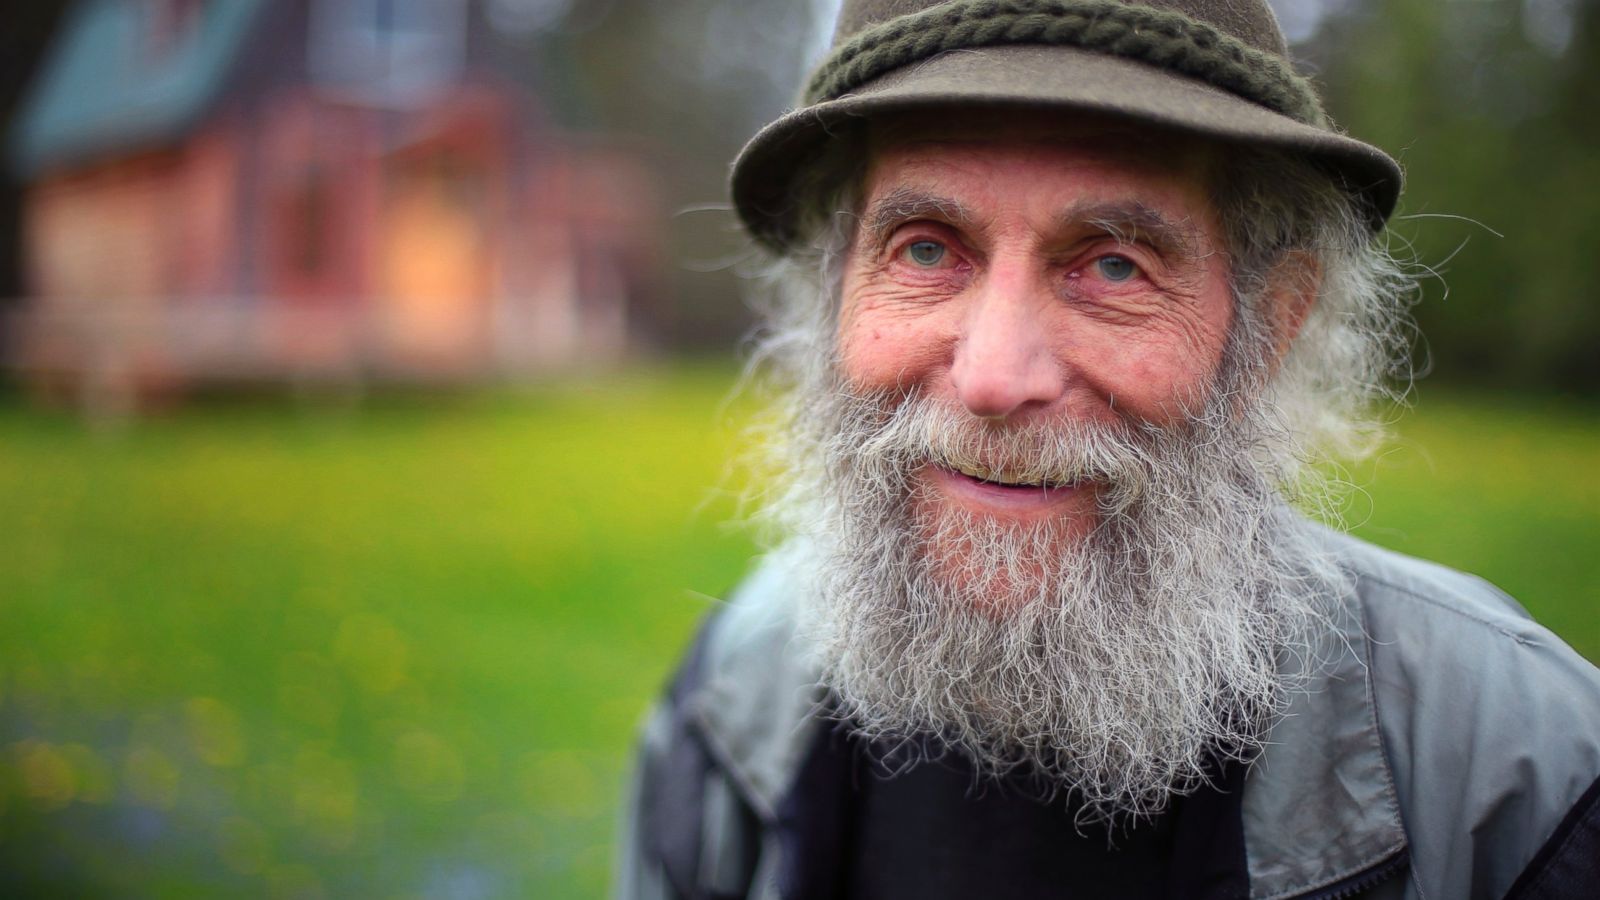 The Unlikely Story of How Burt's Bees Founder Started Company with